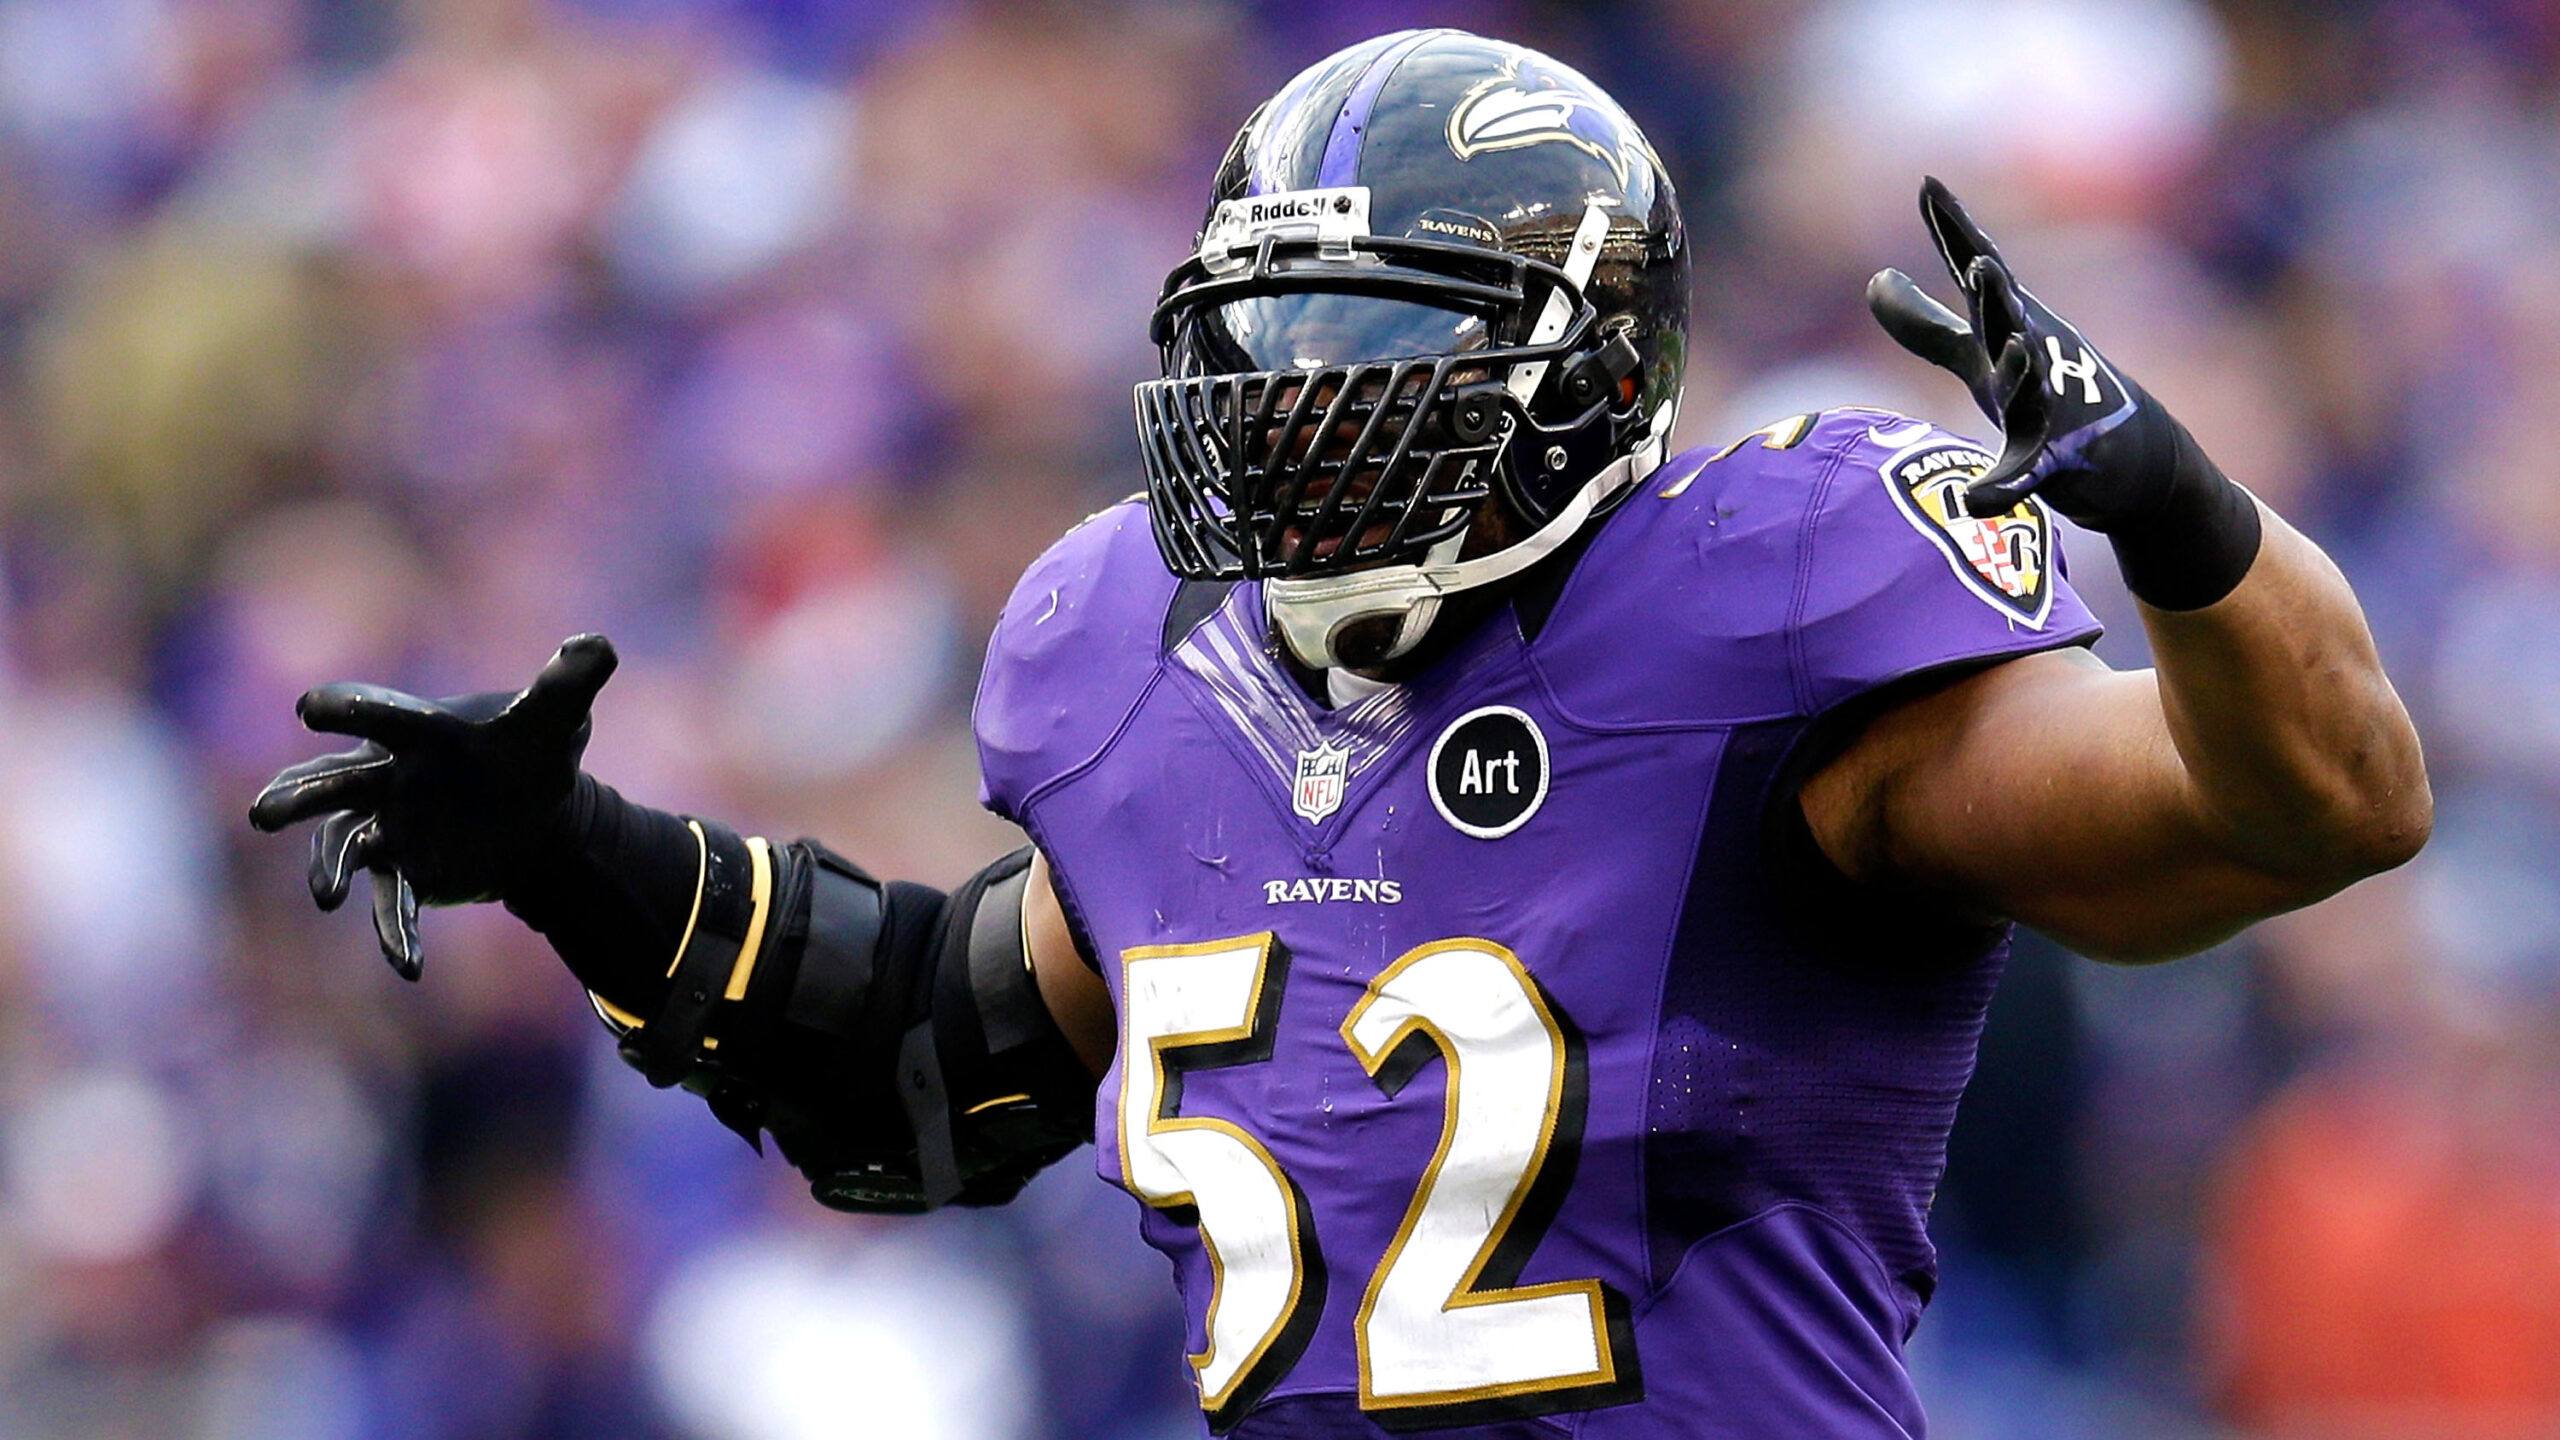 Officials have disclosed the cause of death for Ray Lewis’ son, according to reports.